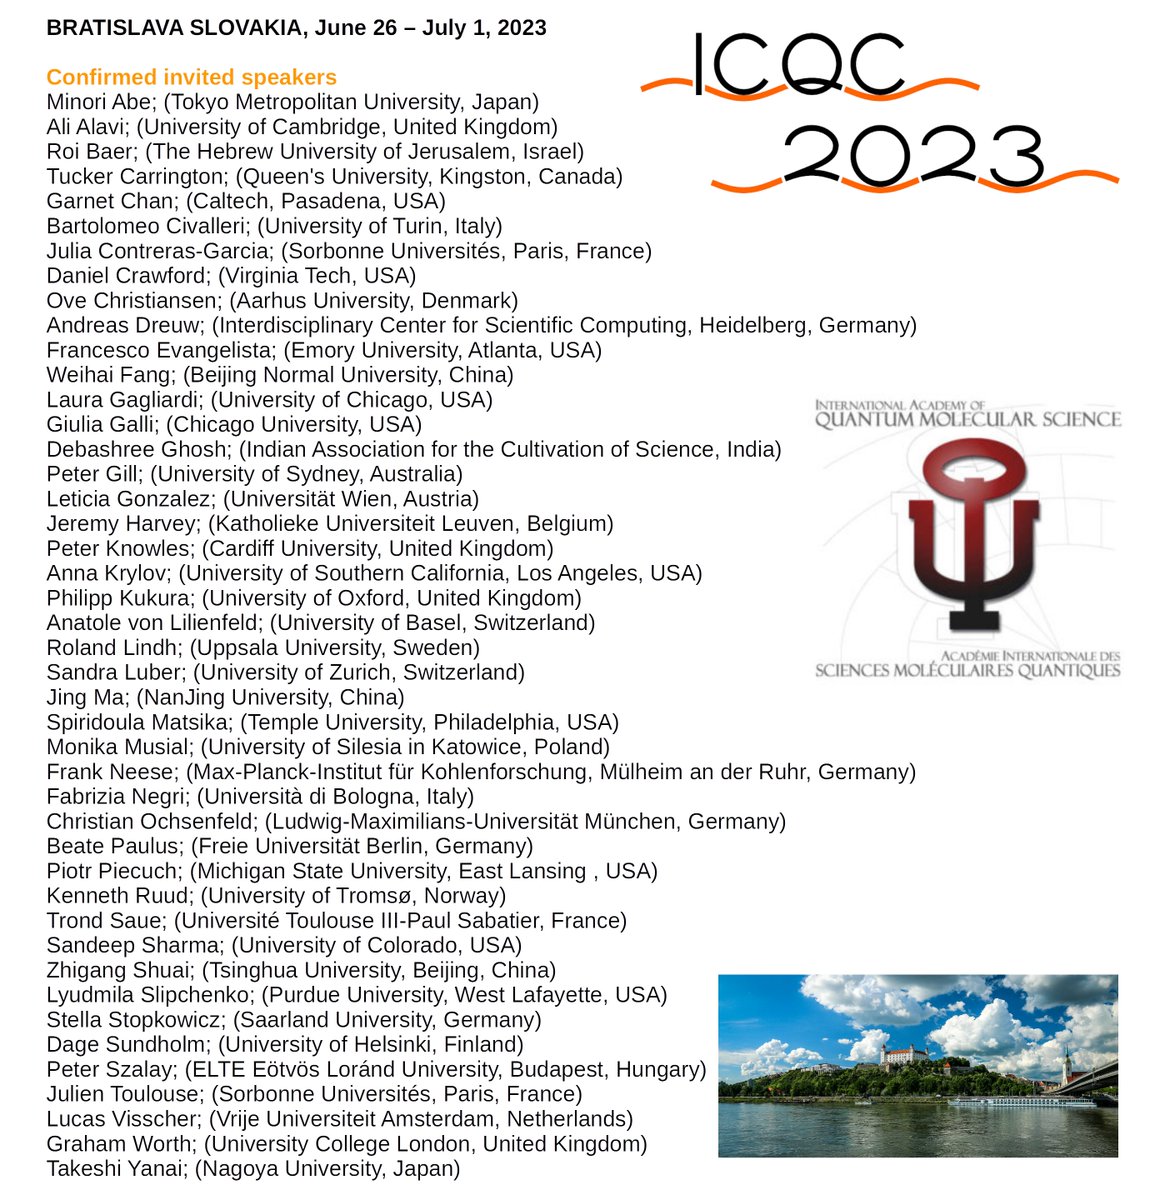 icqc2023.org

EARLY-BIRD MARCH 15, 2023
INVITED CONTRIBUTIONS (36 slots) MARCH 15, 2023
REGULAR MAY 21, 2023

#compchem #quantumchemistry #molecularbiology #medchem #nanomaterials #materialscience